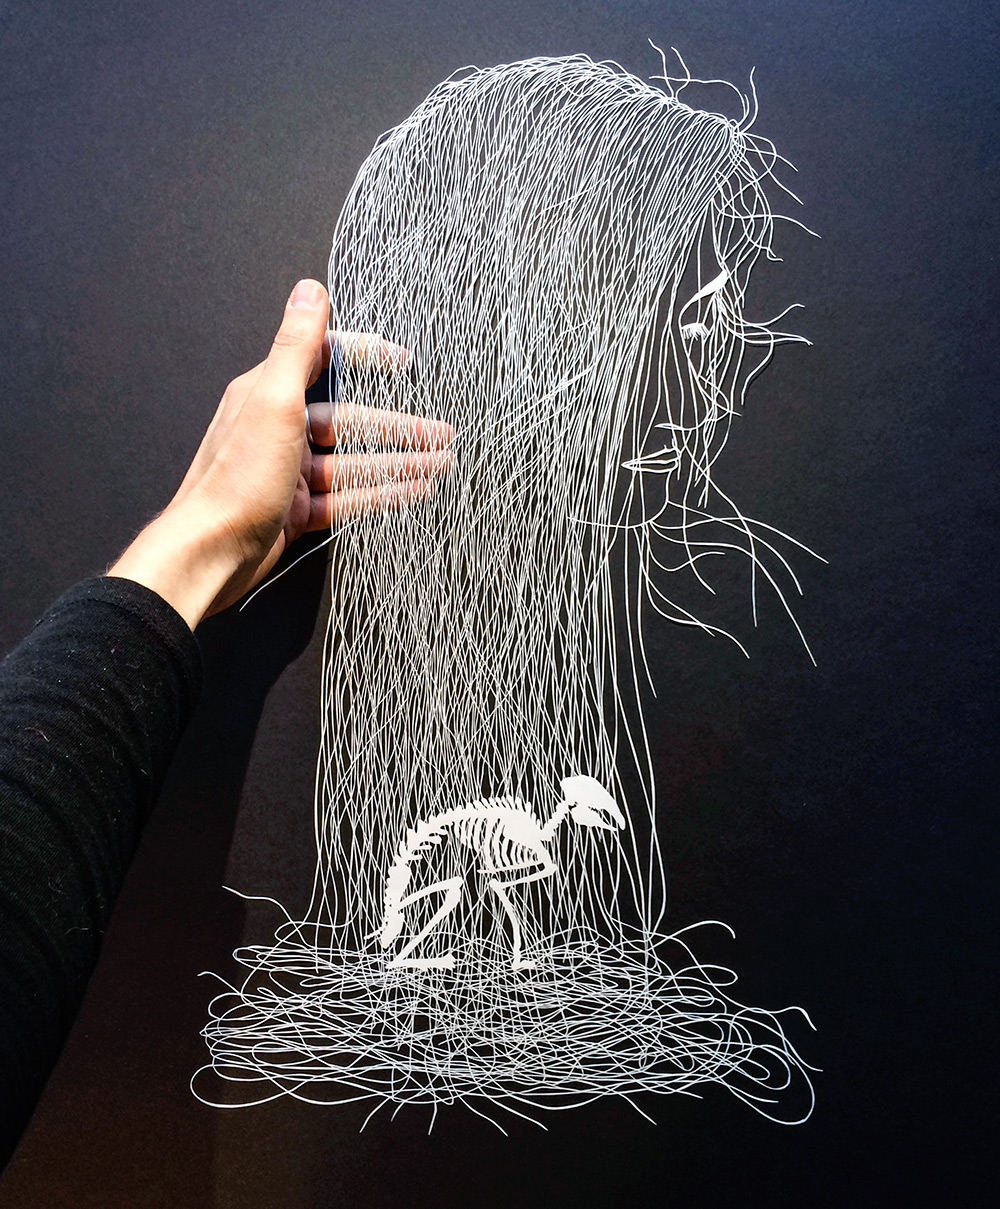 Amazing Drawings Are Actually Made Of Insanely Complex Cut Paper